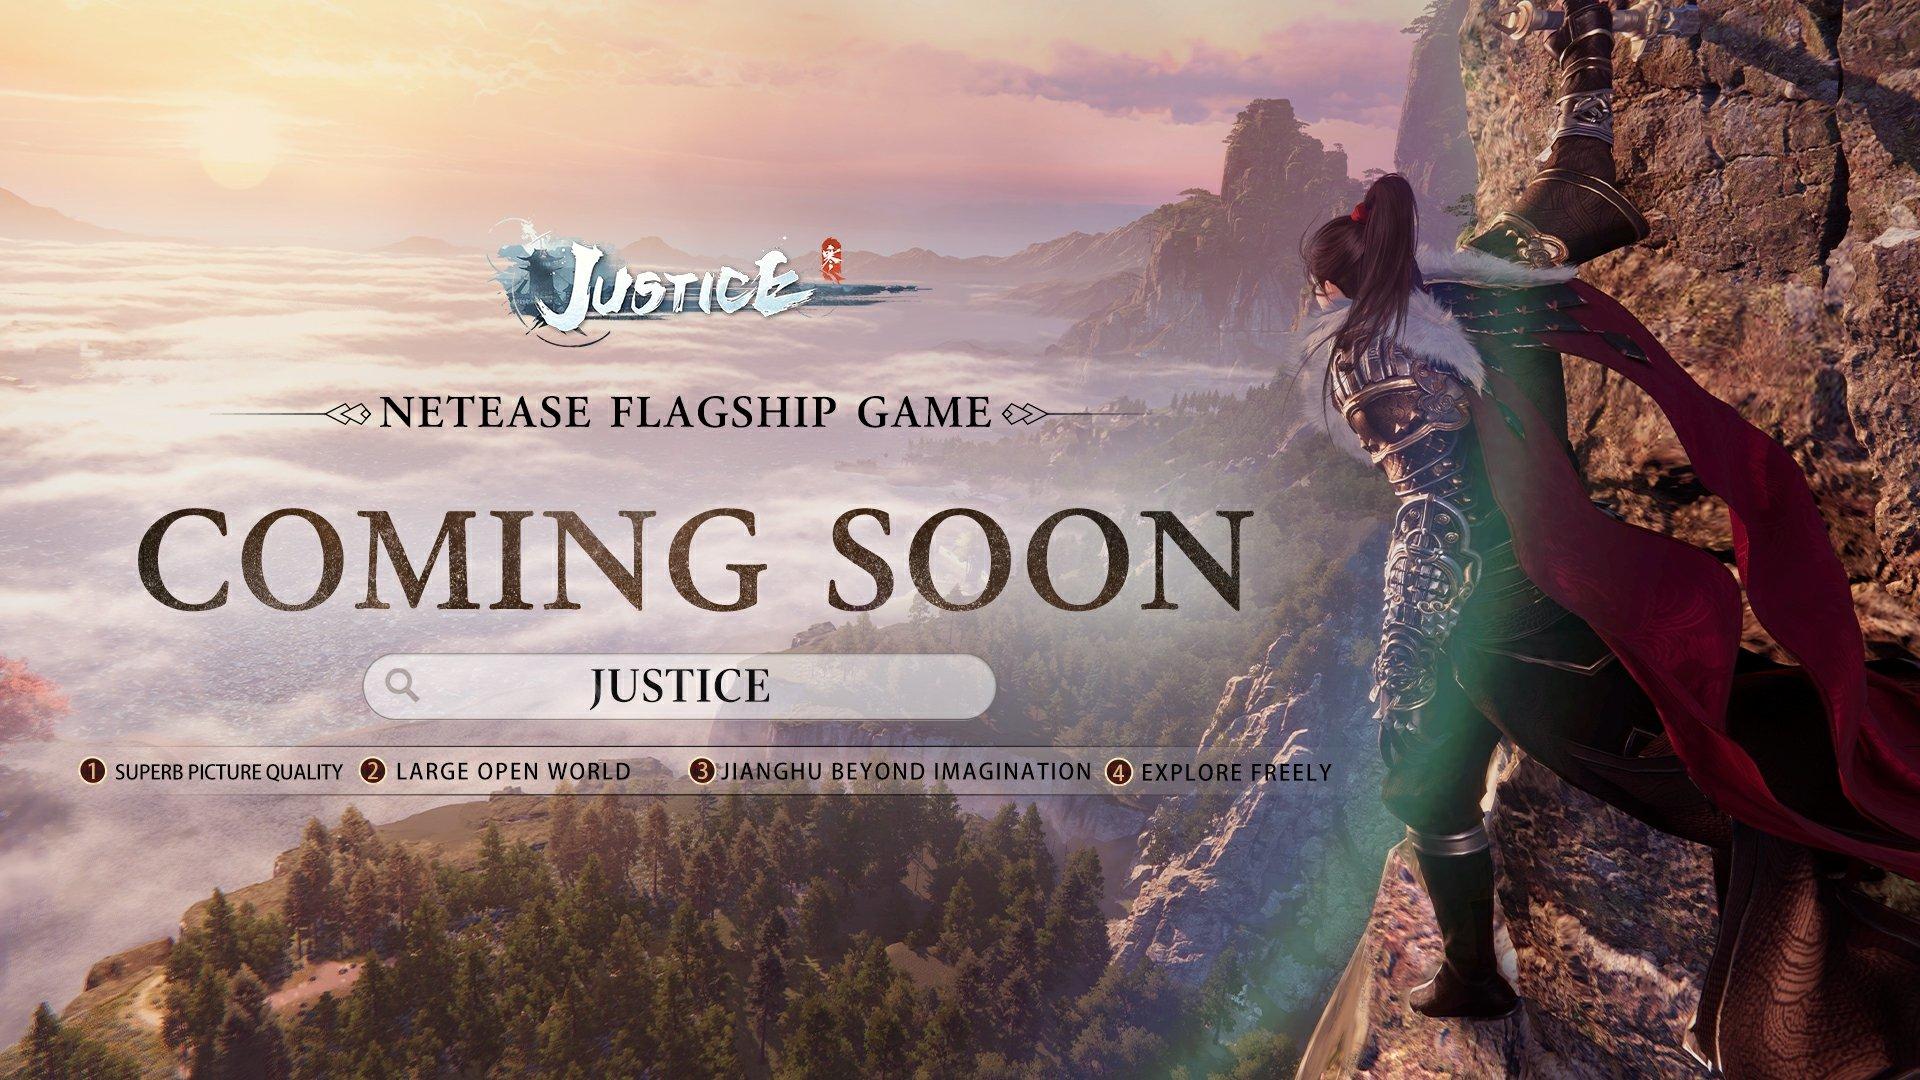 NetEase is preparing the global expansion of Justice Mobile